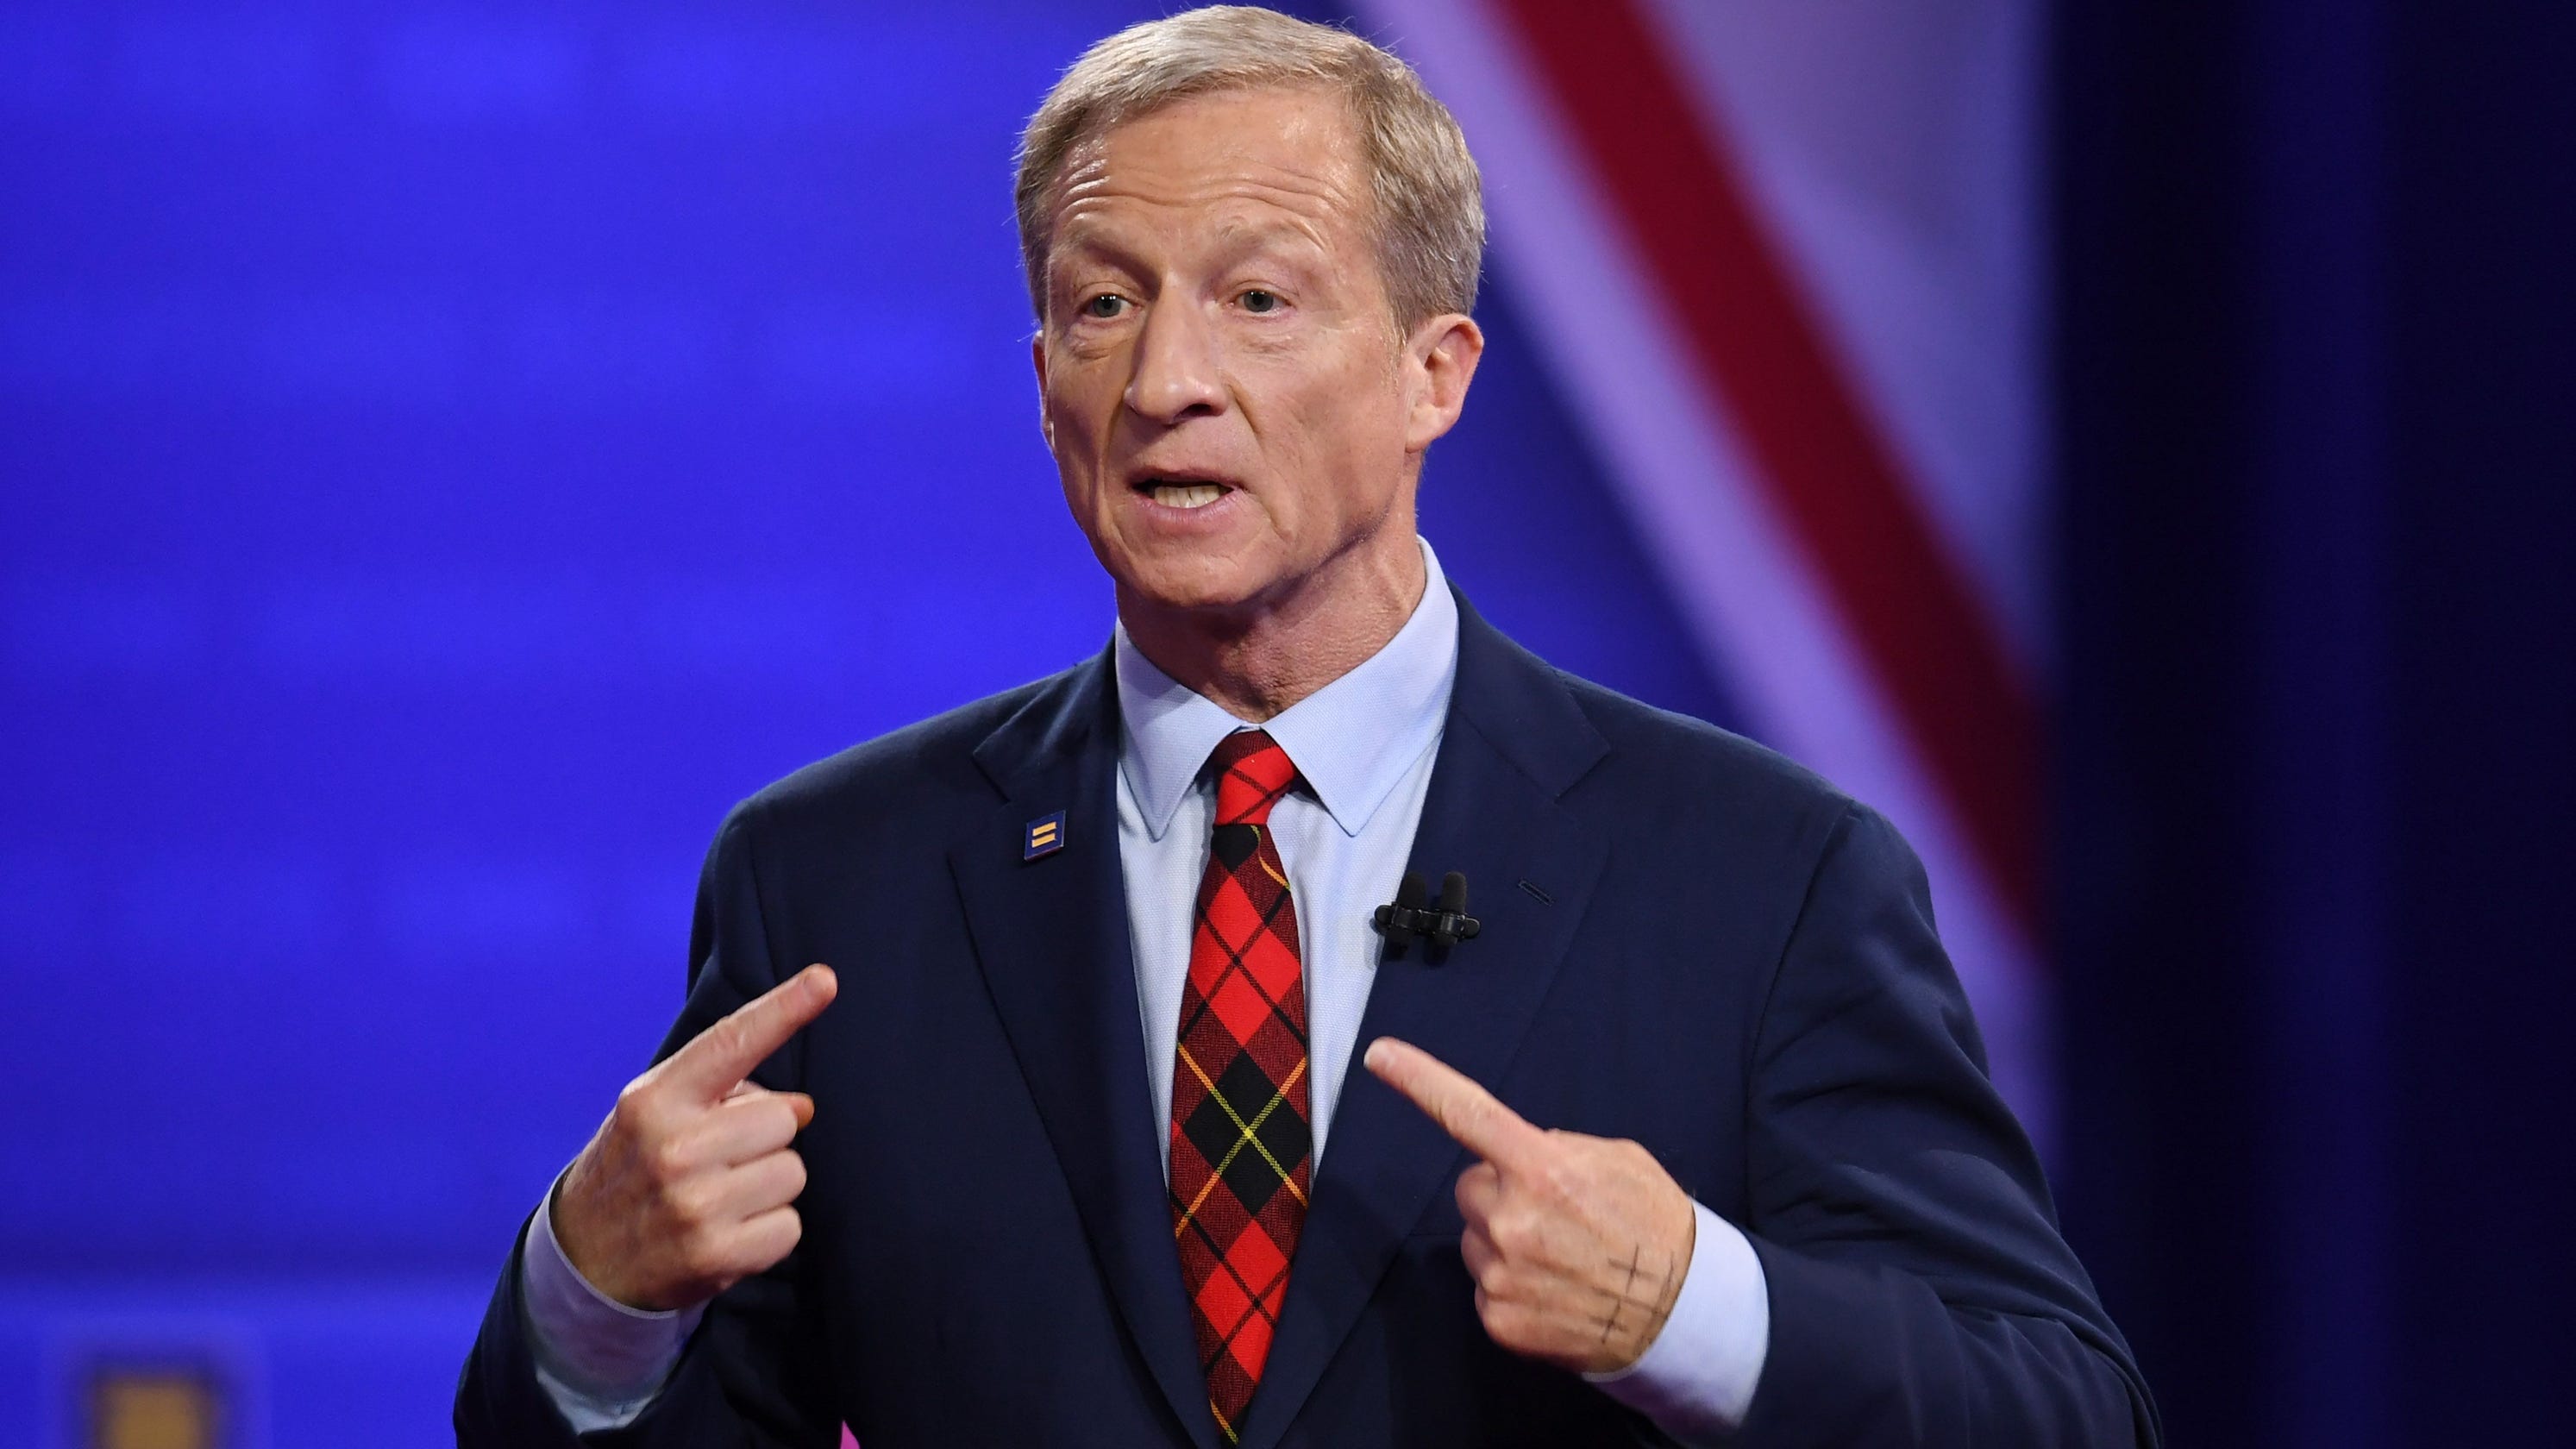 Election 2020: Tom Steyer wants legal immigration for climate refugees2987 x 1680